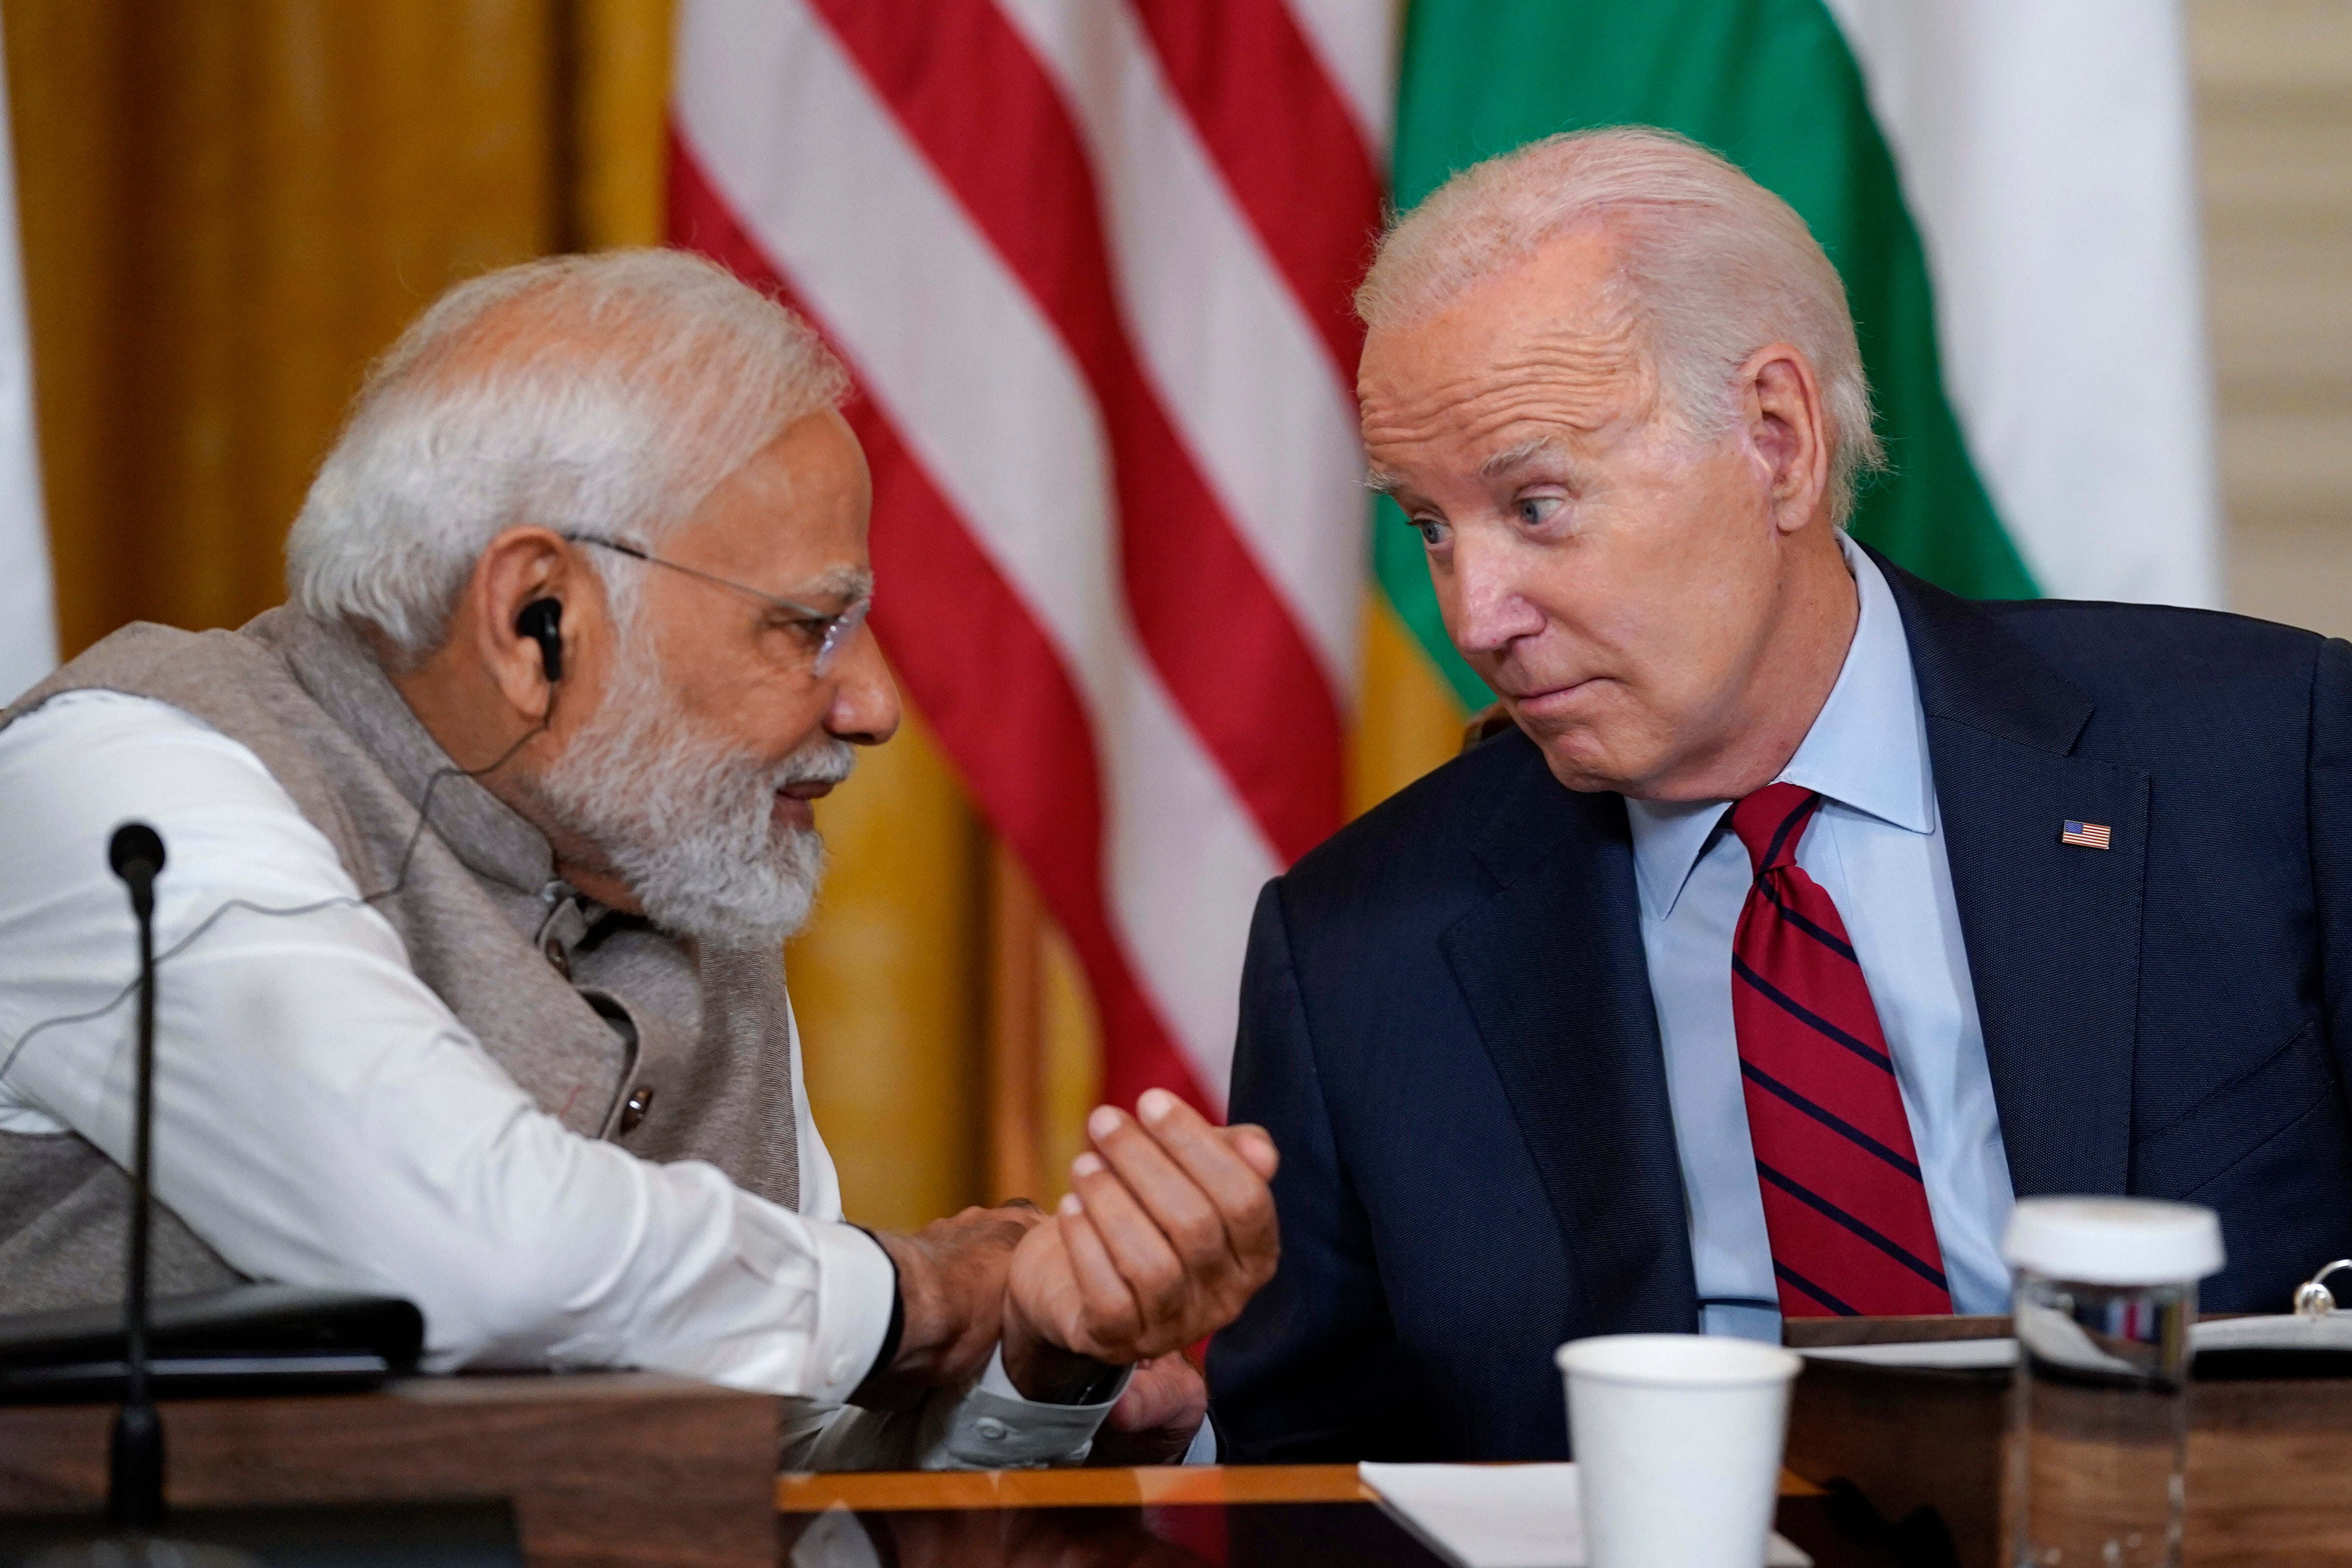 US president Joe Biden speaks with prime minister Narendra Modi during a meeting with American and Indian business leaders at the White House